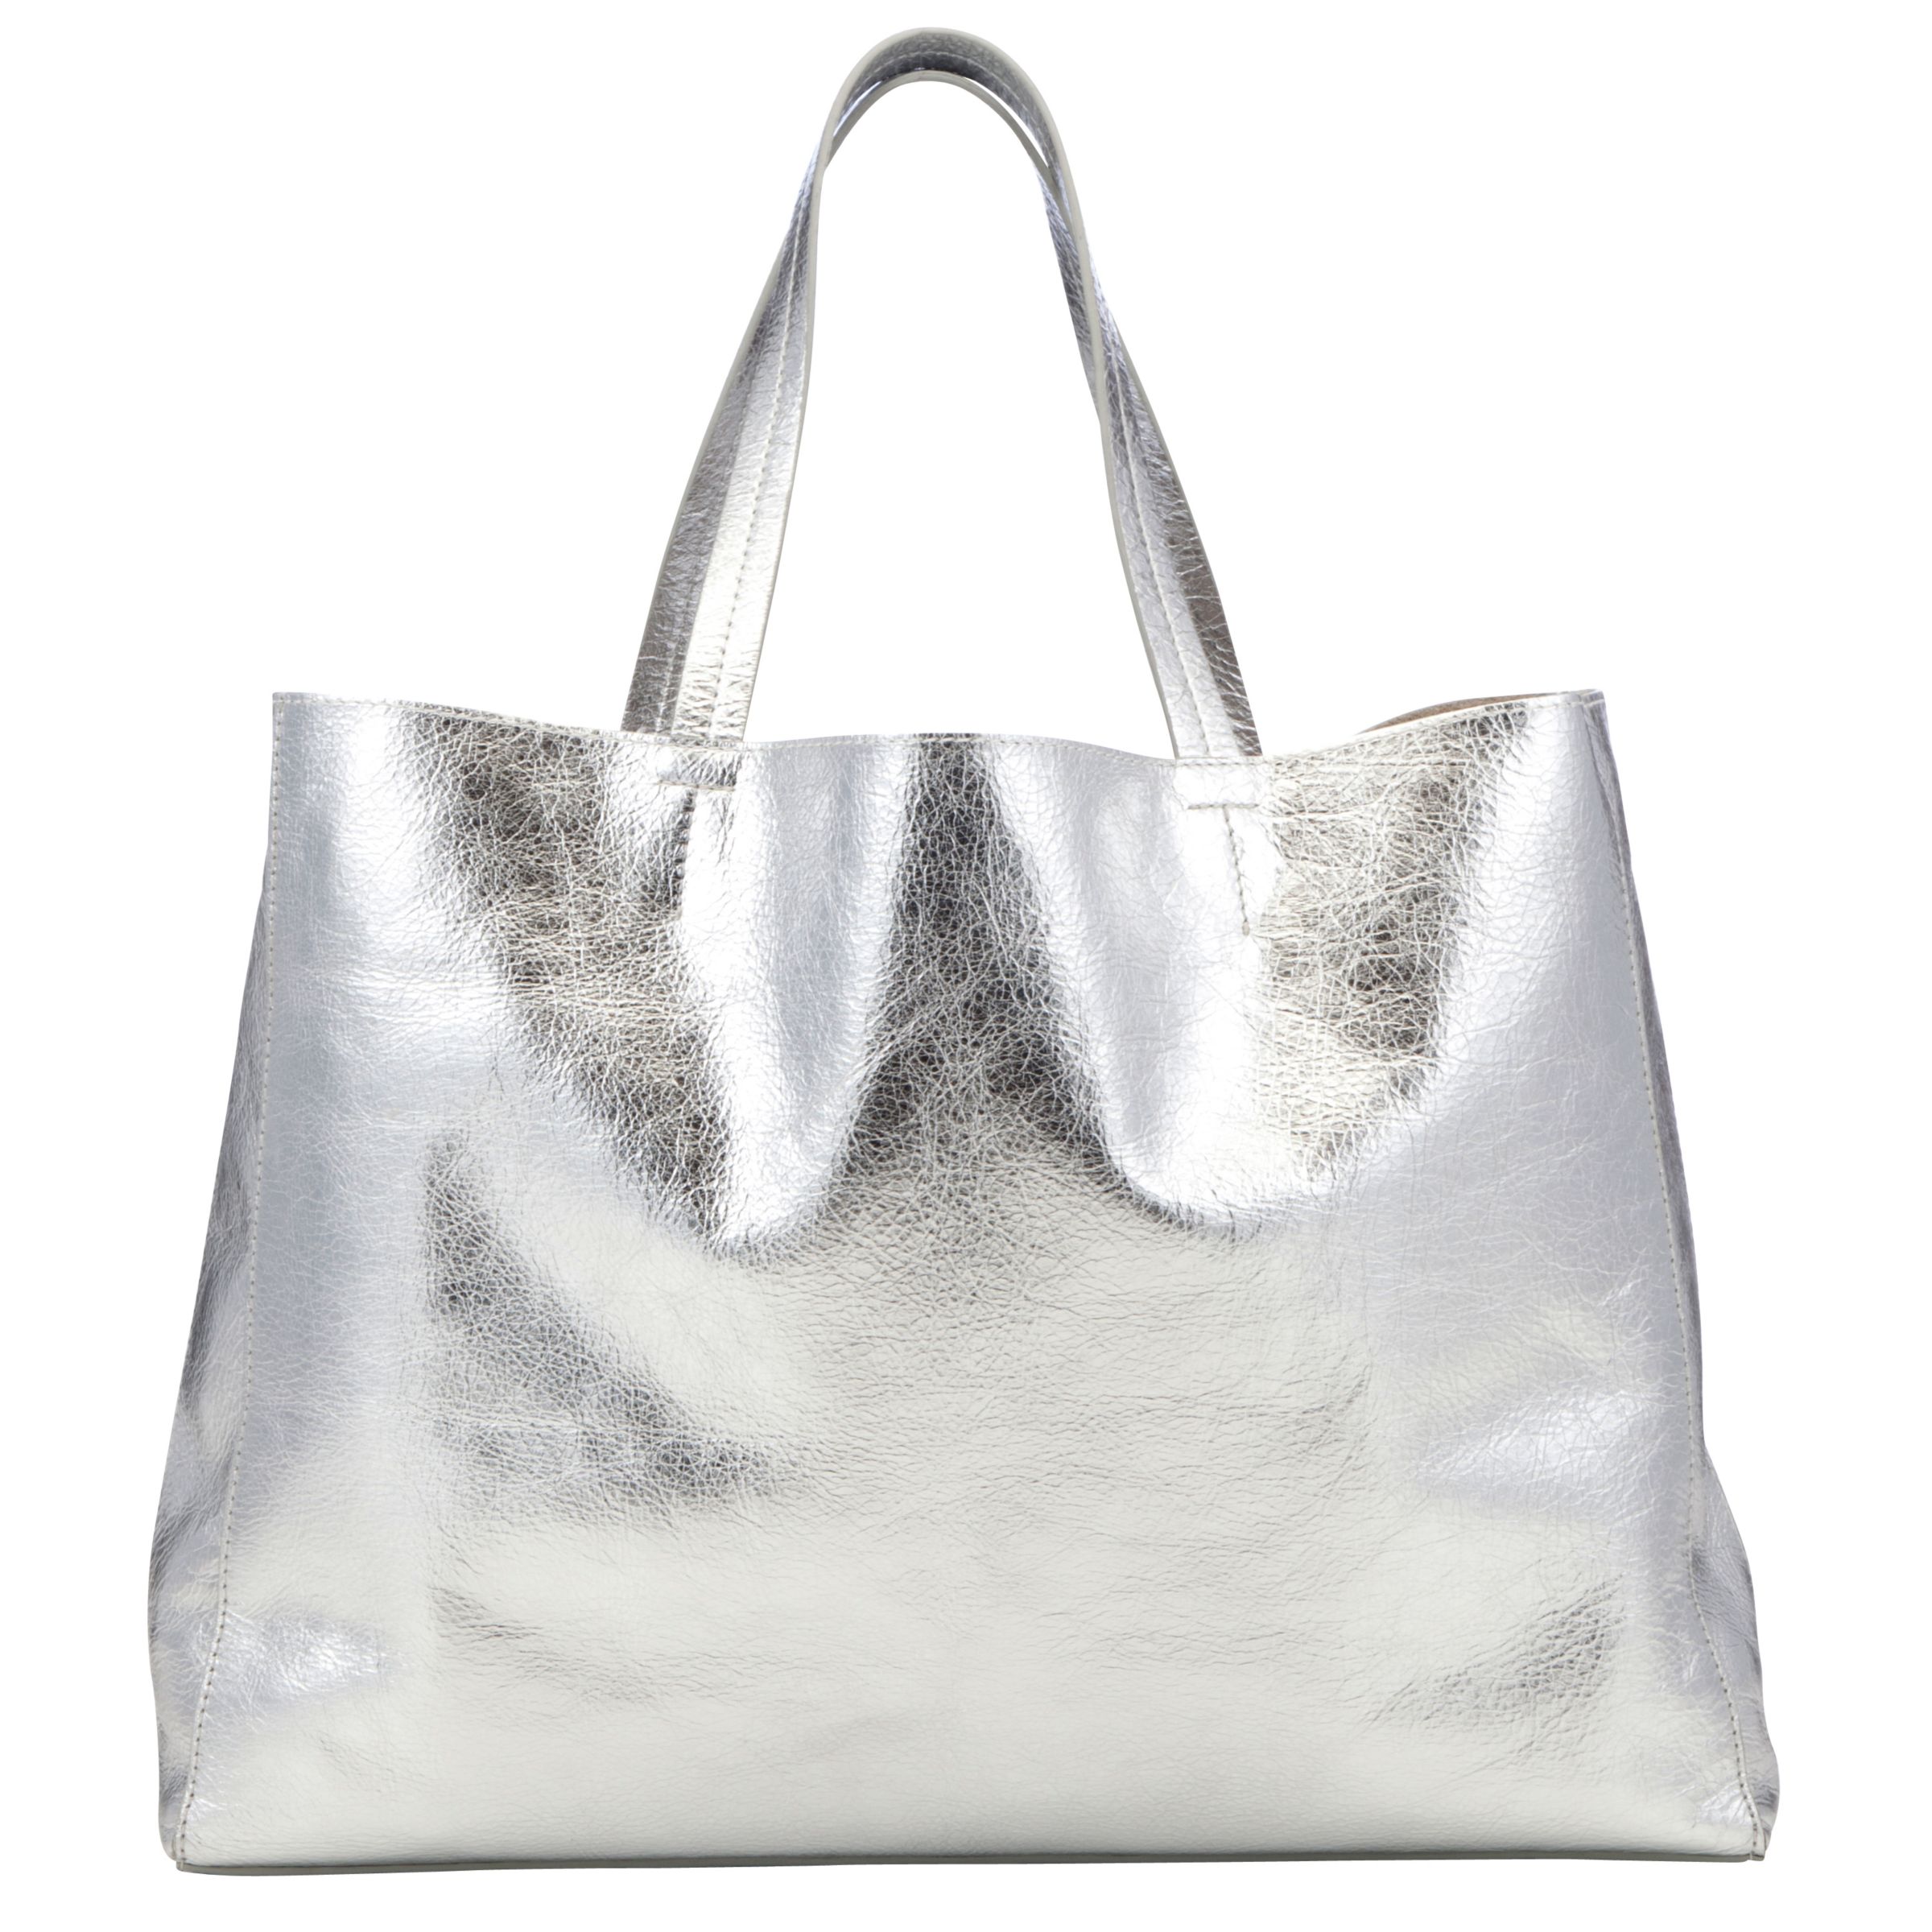 Collection WEEKEND by John Lewis Morgan Leather Tote Bag, Silver